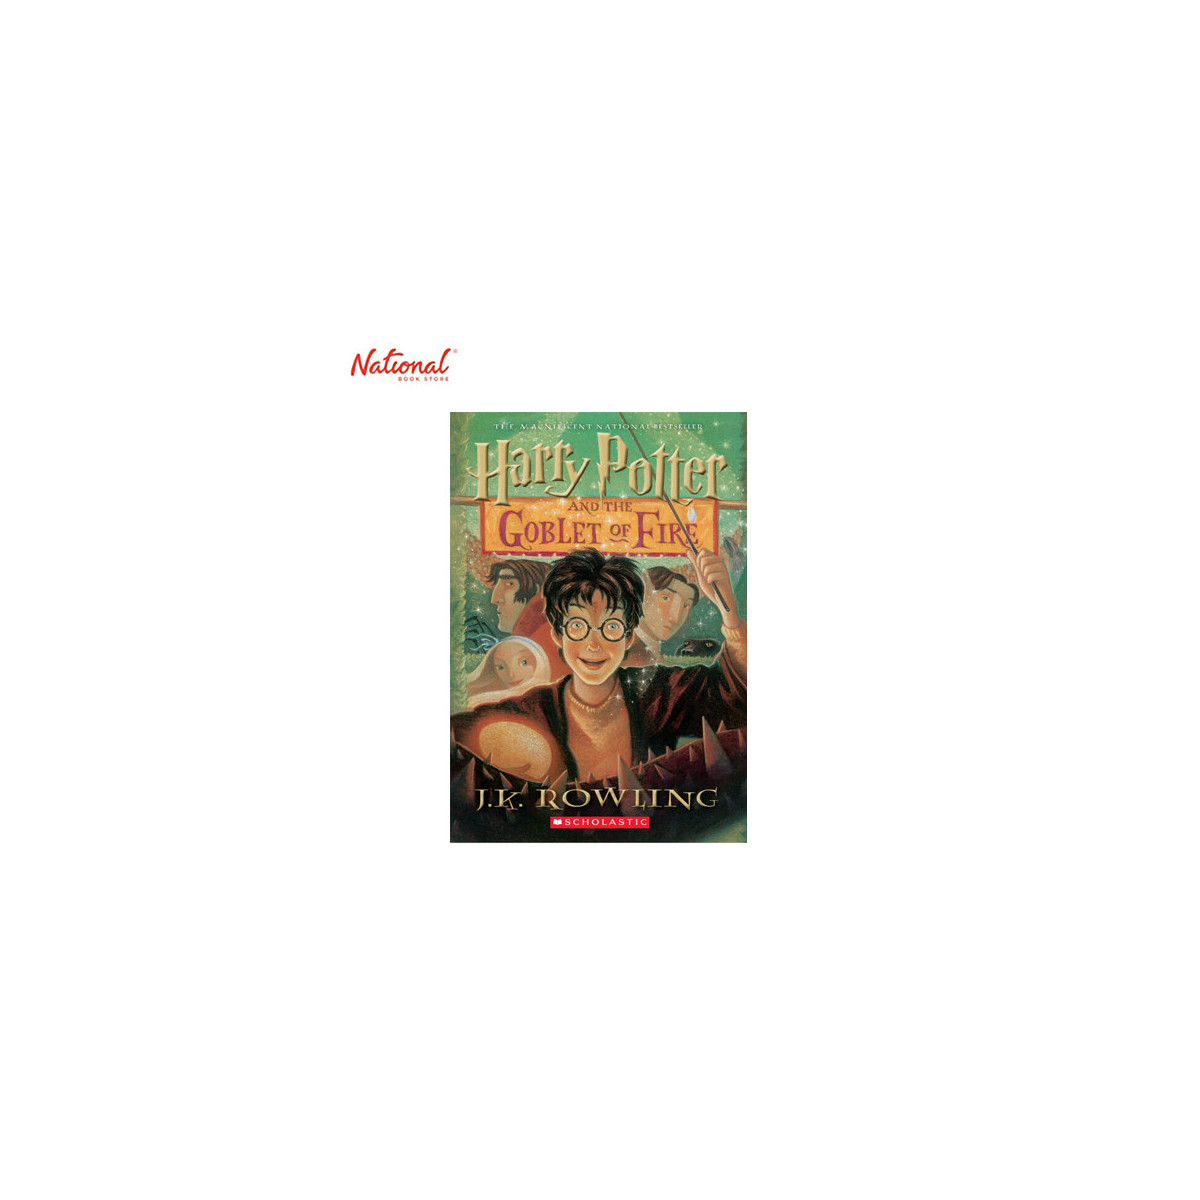 Harry Potter and the Goblet of Fire Trade Paperback by J. K. Rowling